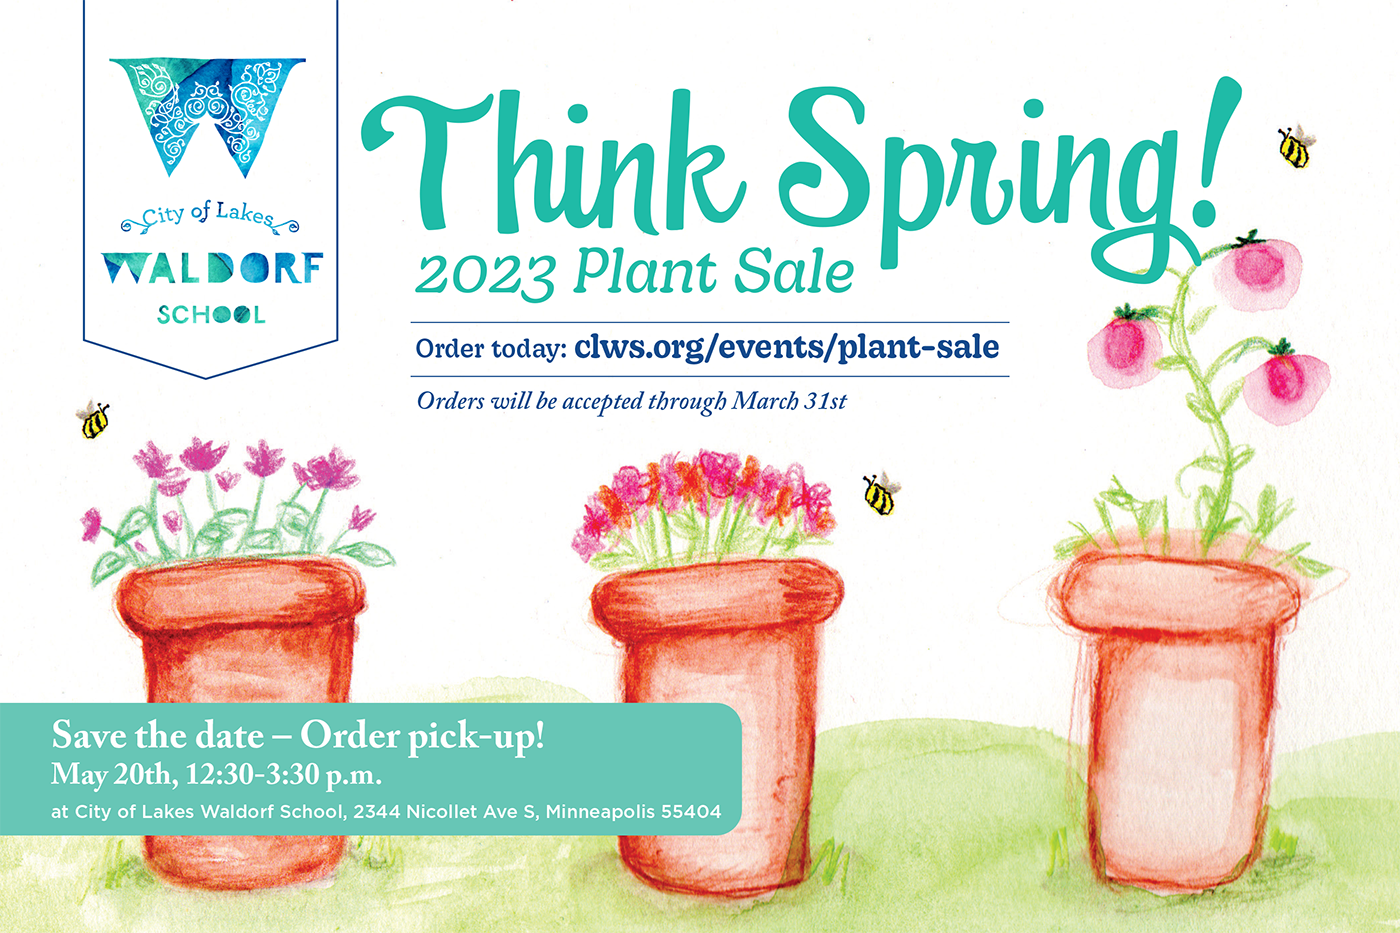 Plant sale postcard, featuring potted plants painted with watercolors